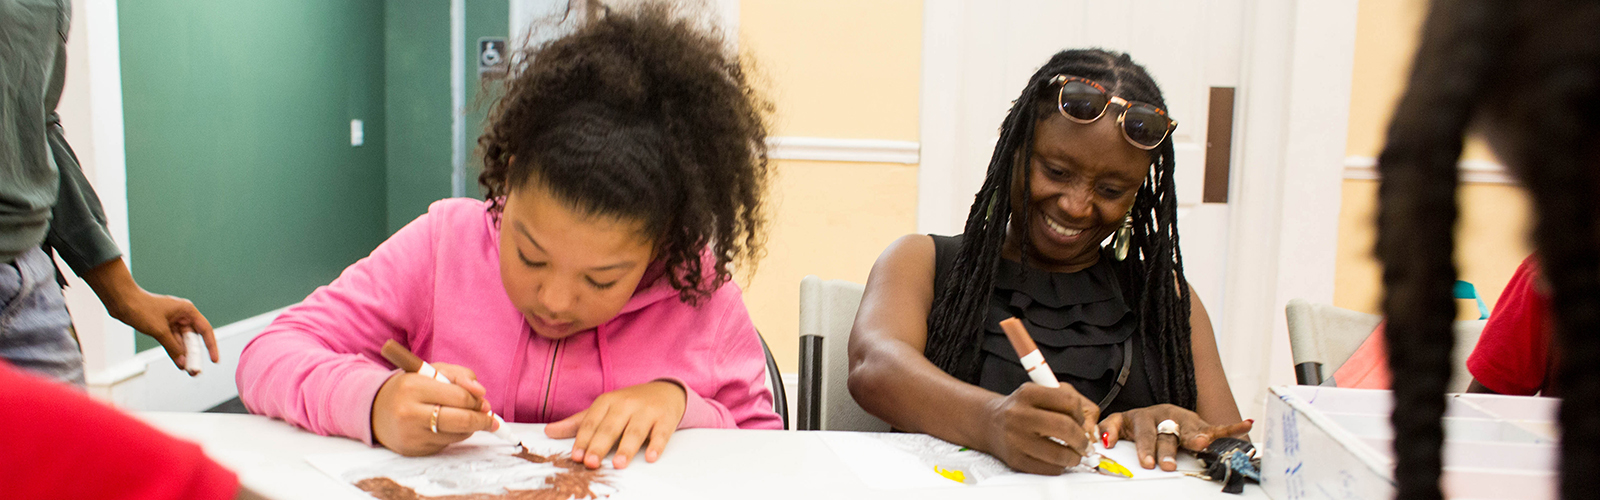 Sonia Coleman, right, works with students at the Tampa Heights Youth Development and Community Center.